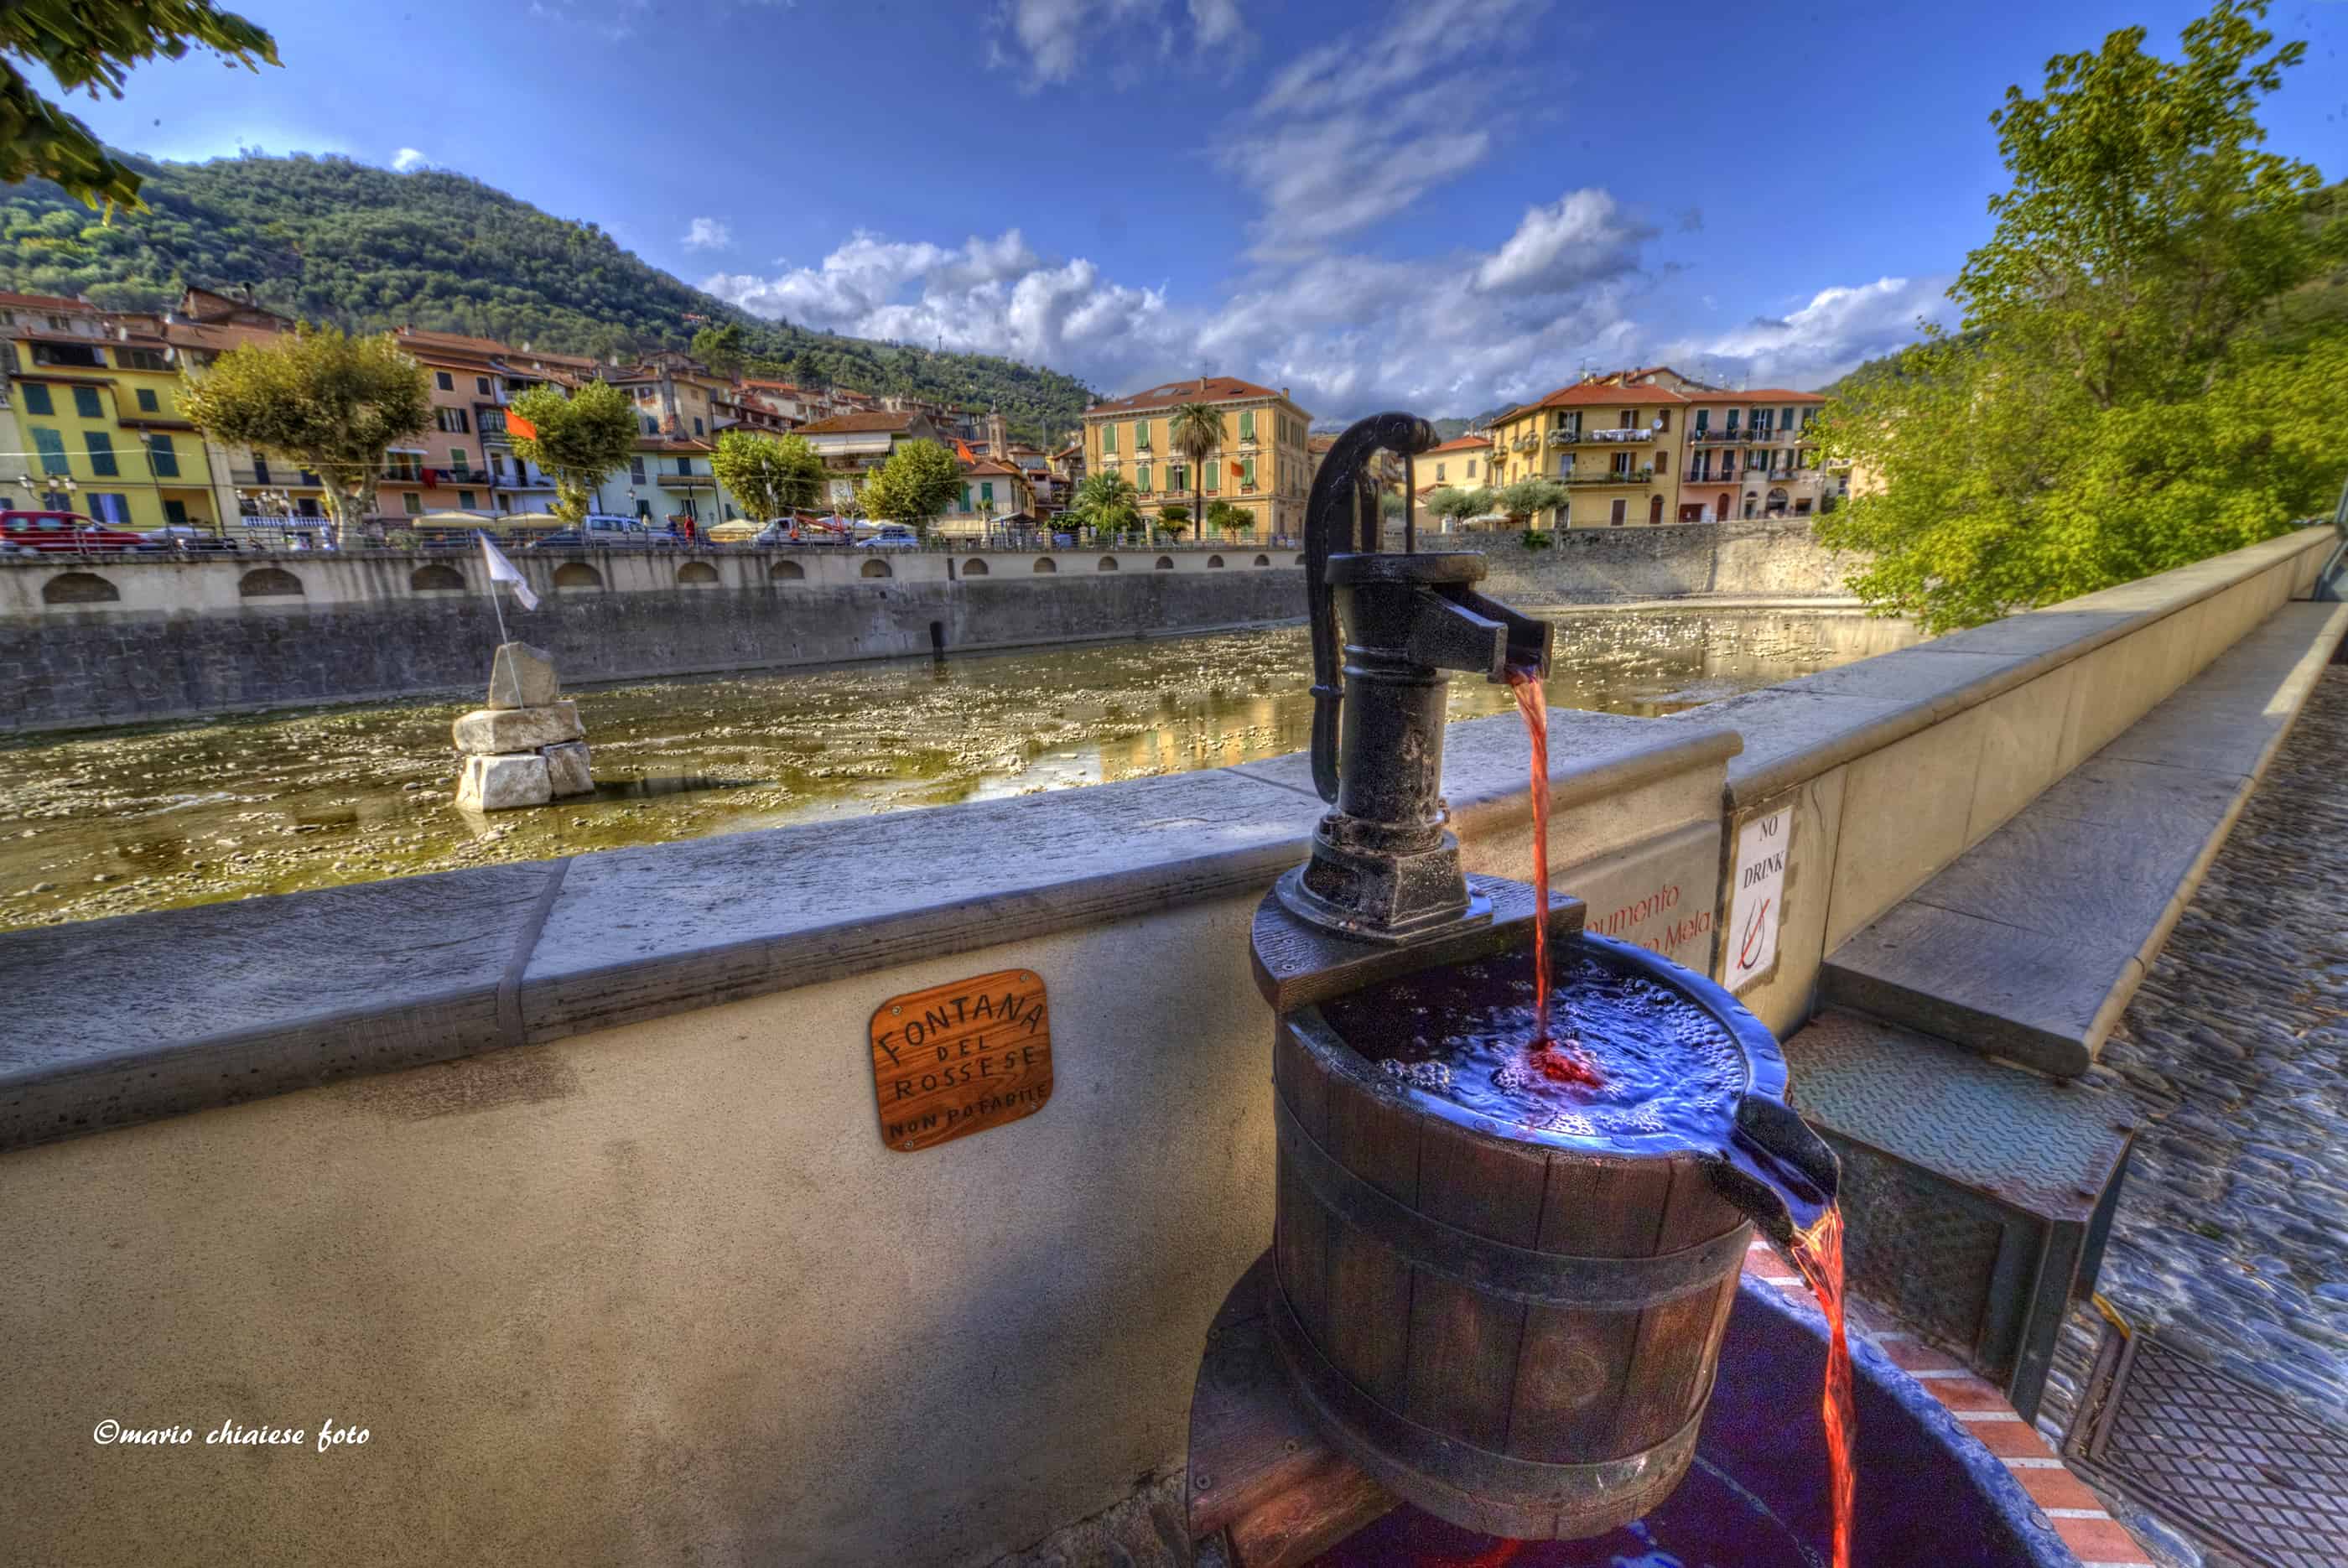 The village of Dolceacqua in Liguria despite its name is also known for its famous wine: the Rossese. So famous for being able to afford a fountain in the square ... it's a shame though that it's not wine.  | Mario Chiaiese - e-borghi Community